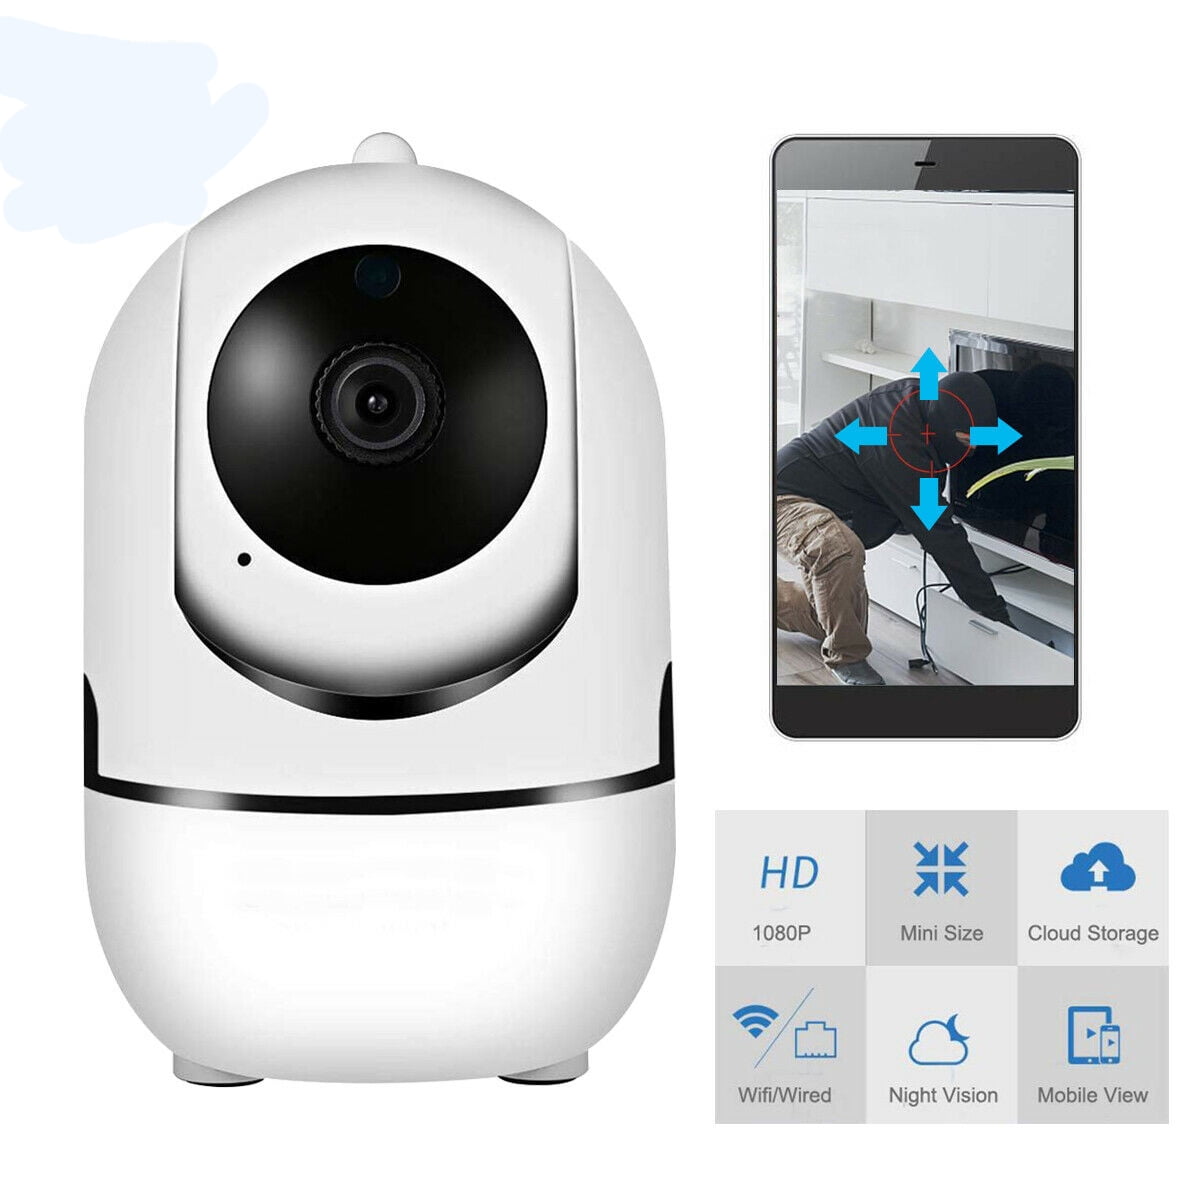 Remote Monitor with iOS & Android App 1080p Home Camera,Indoor Wireless WiFi Home IP Security Camera,AAJO Panoramic Pet Camera White Night Vision Micro SD Card Storage Baby Monitor with 2-Way Audio 051303